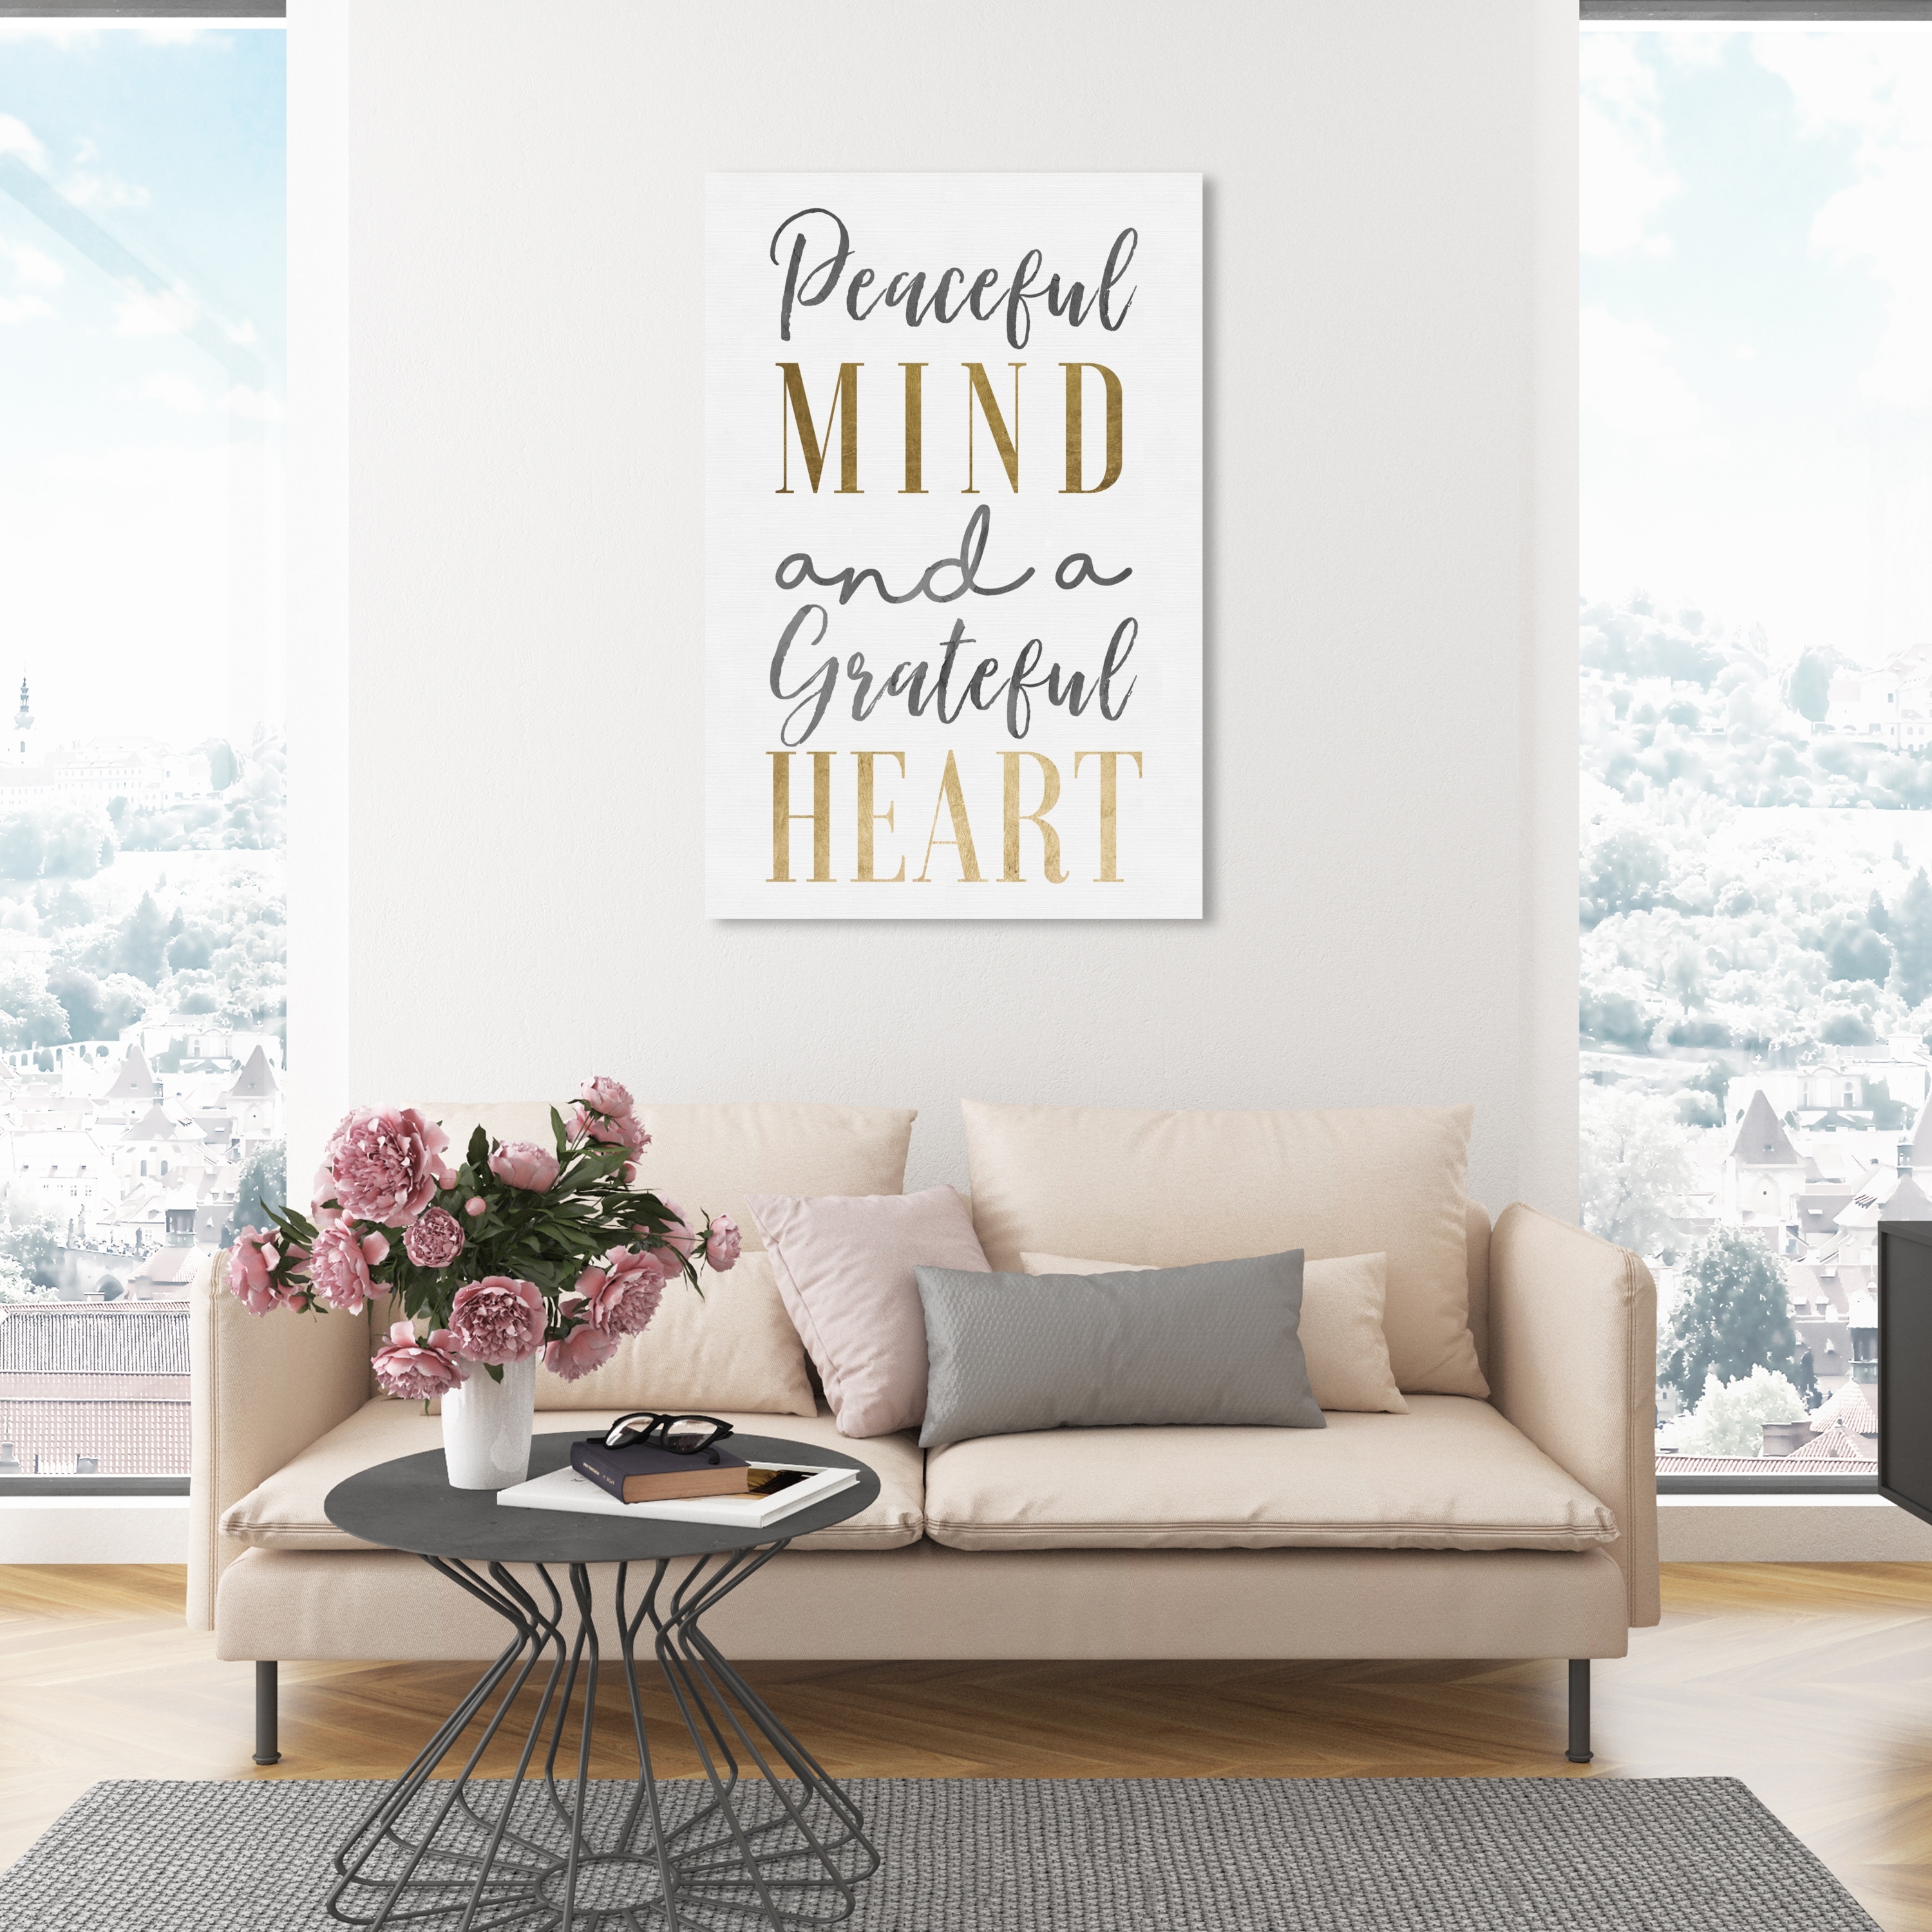 Oliver Gal 'More Gold Letters' Typography and Quotes Wall Art